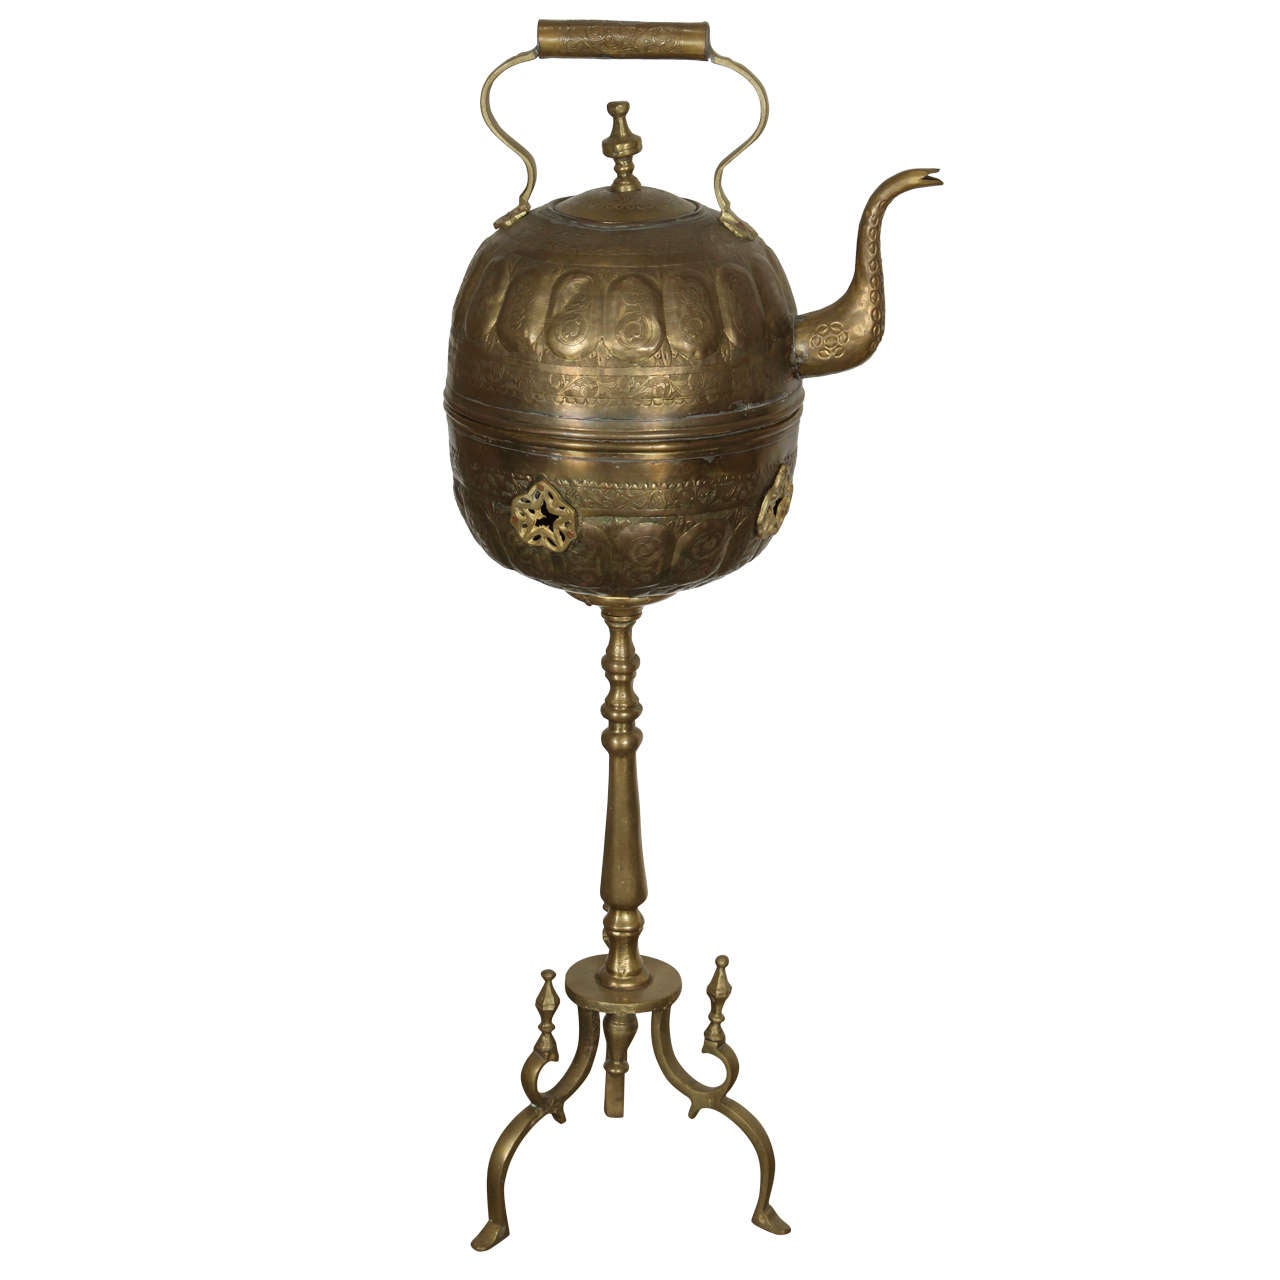 Middle Eastern Turkish Antique Brass Tea Kettle Pot on Stand